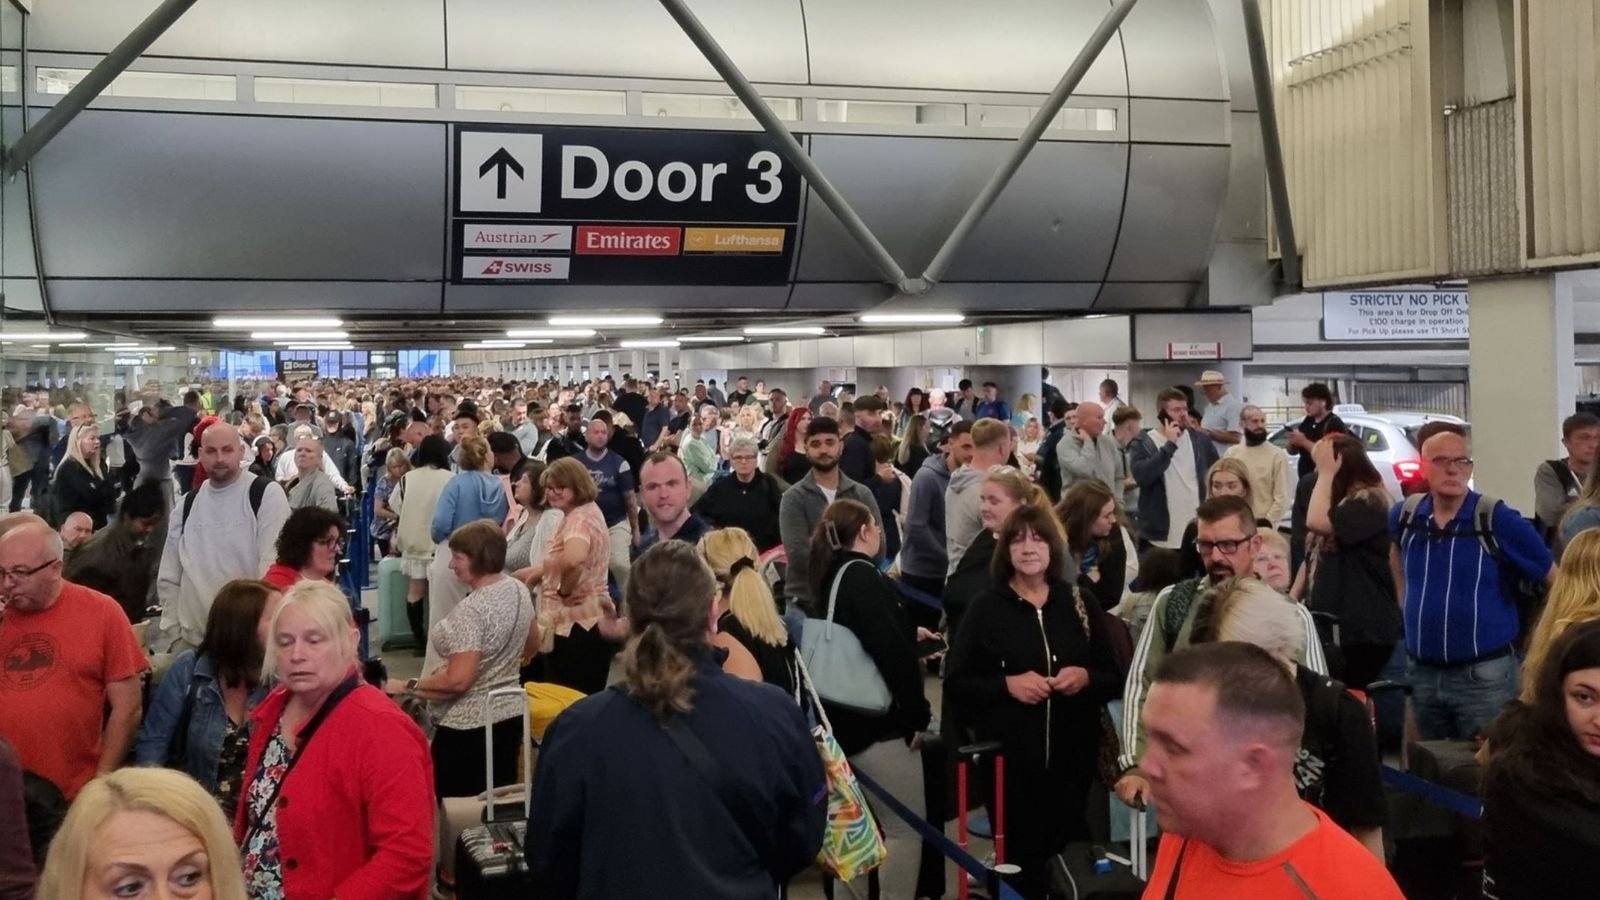 Passengers in the airport are facing significant delays. Pic: X/SebbieJ